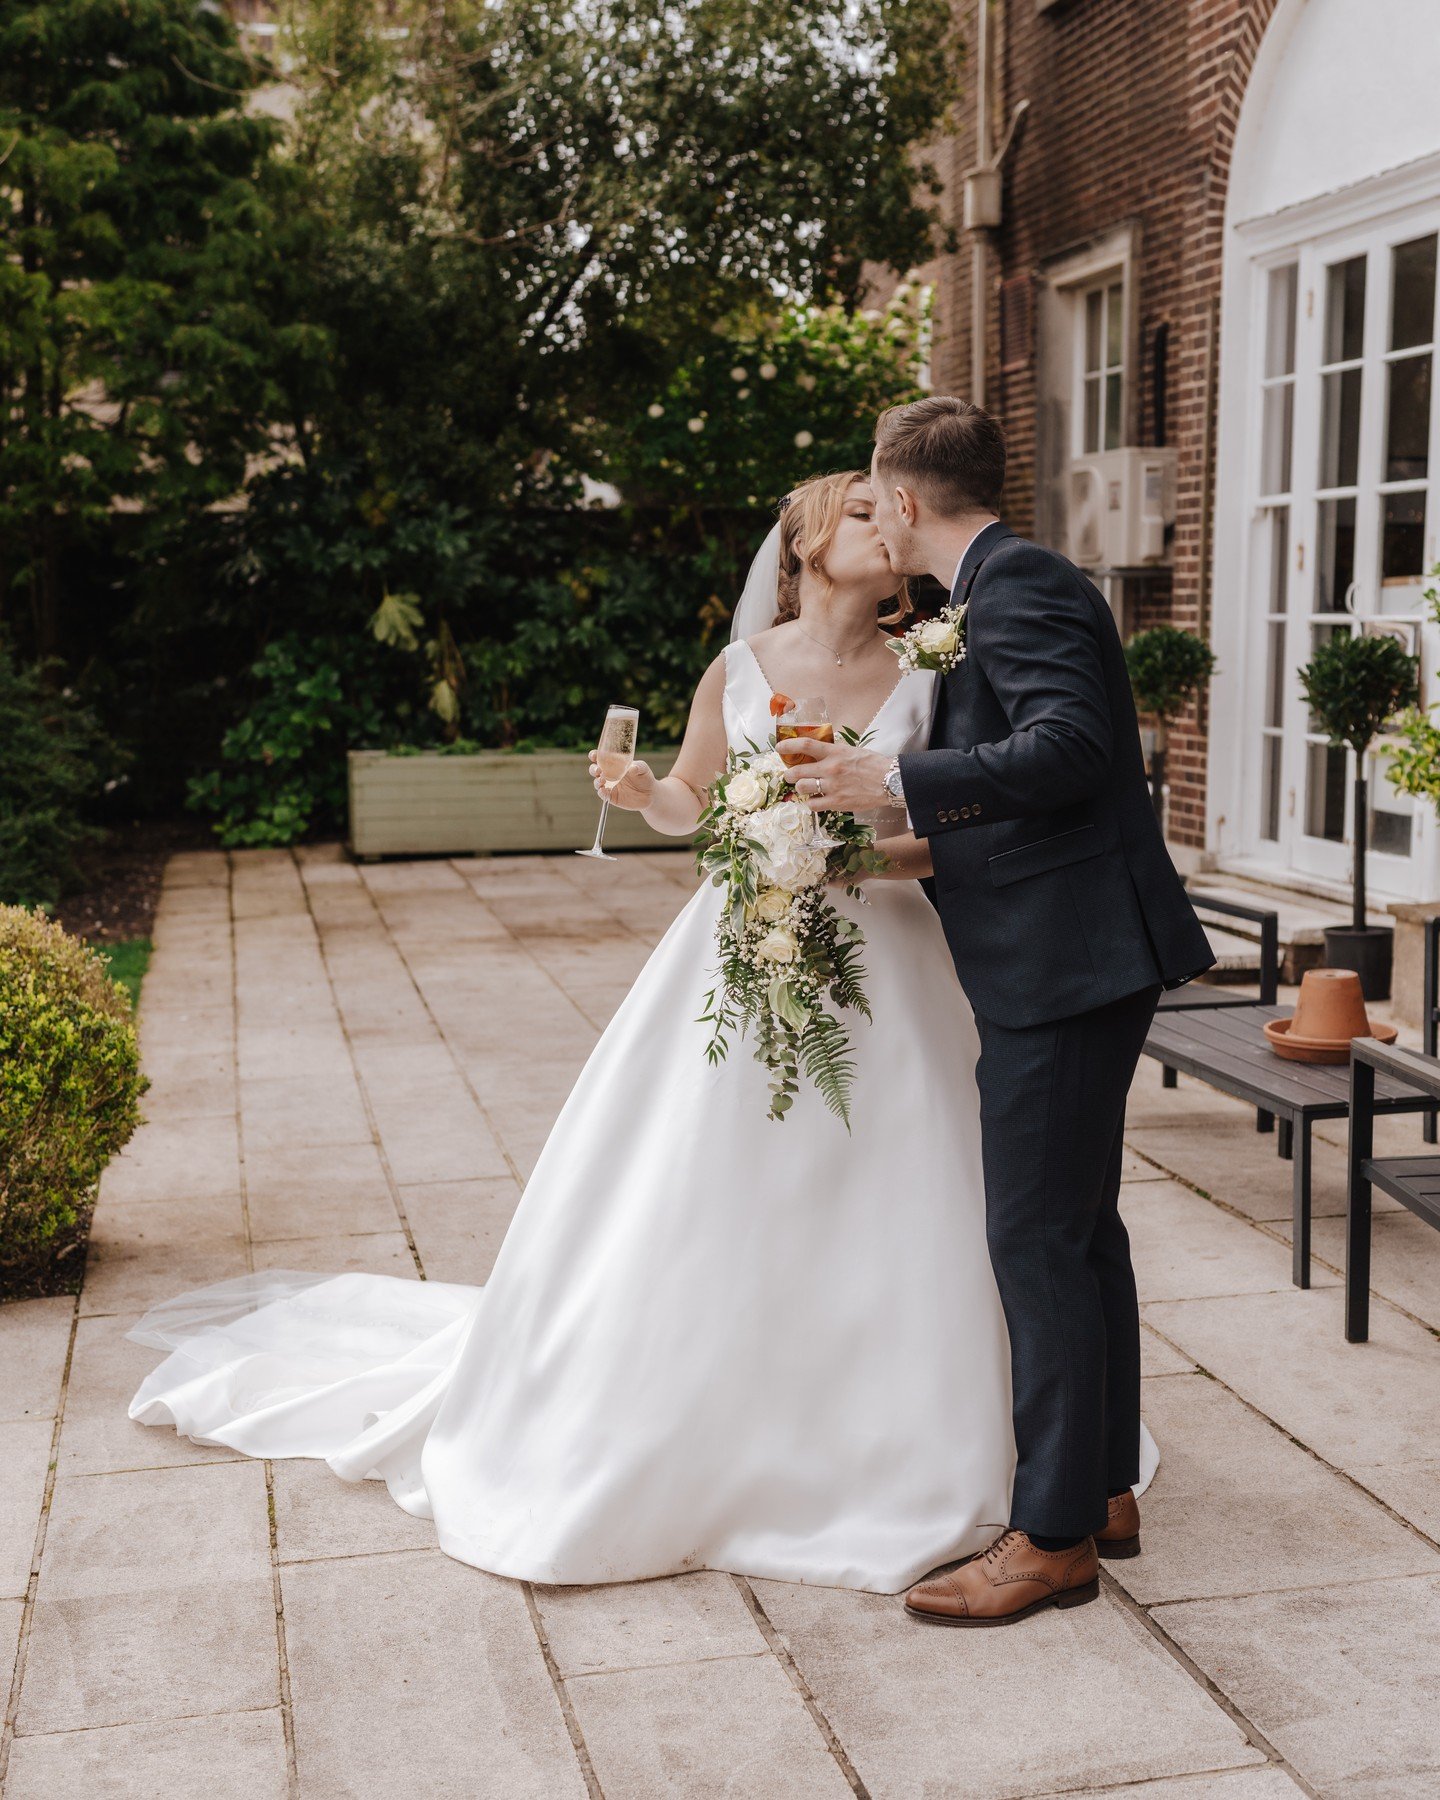 Editing Beth &amp; Jake's day today. 

I really enjoy every element of being a photographer, and in my opinion editing is a really important process to not only tell the story of your day, but to capture the feeling of your day too.

My gorgeous brid